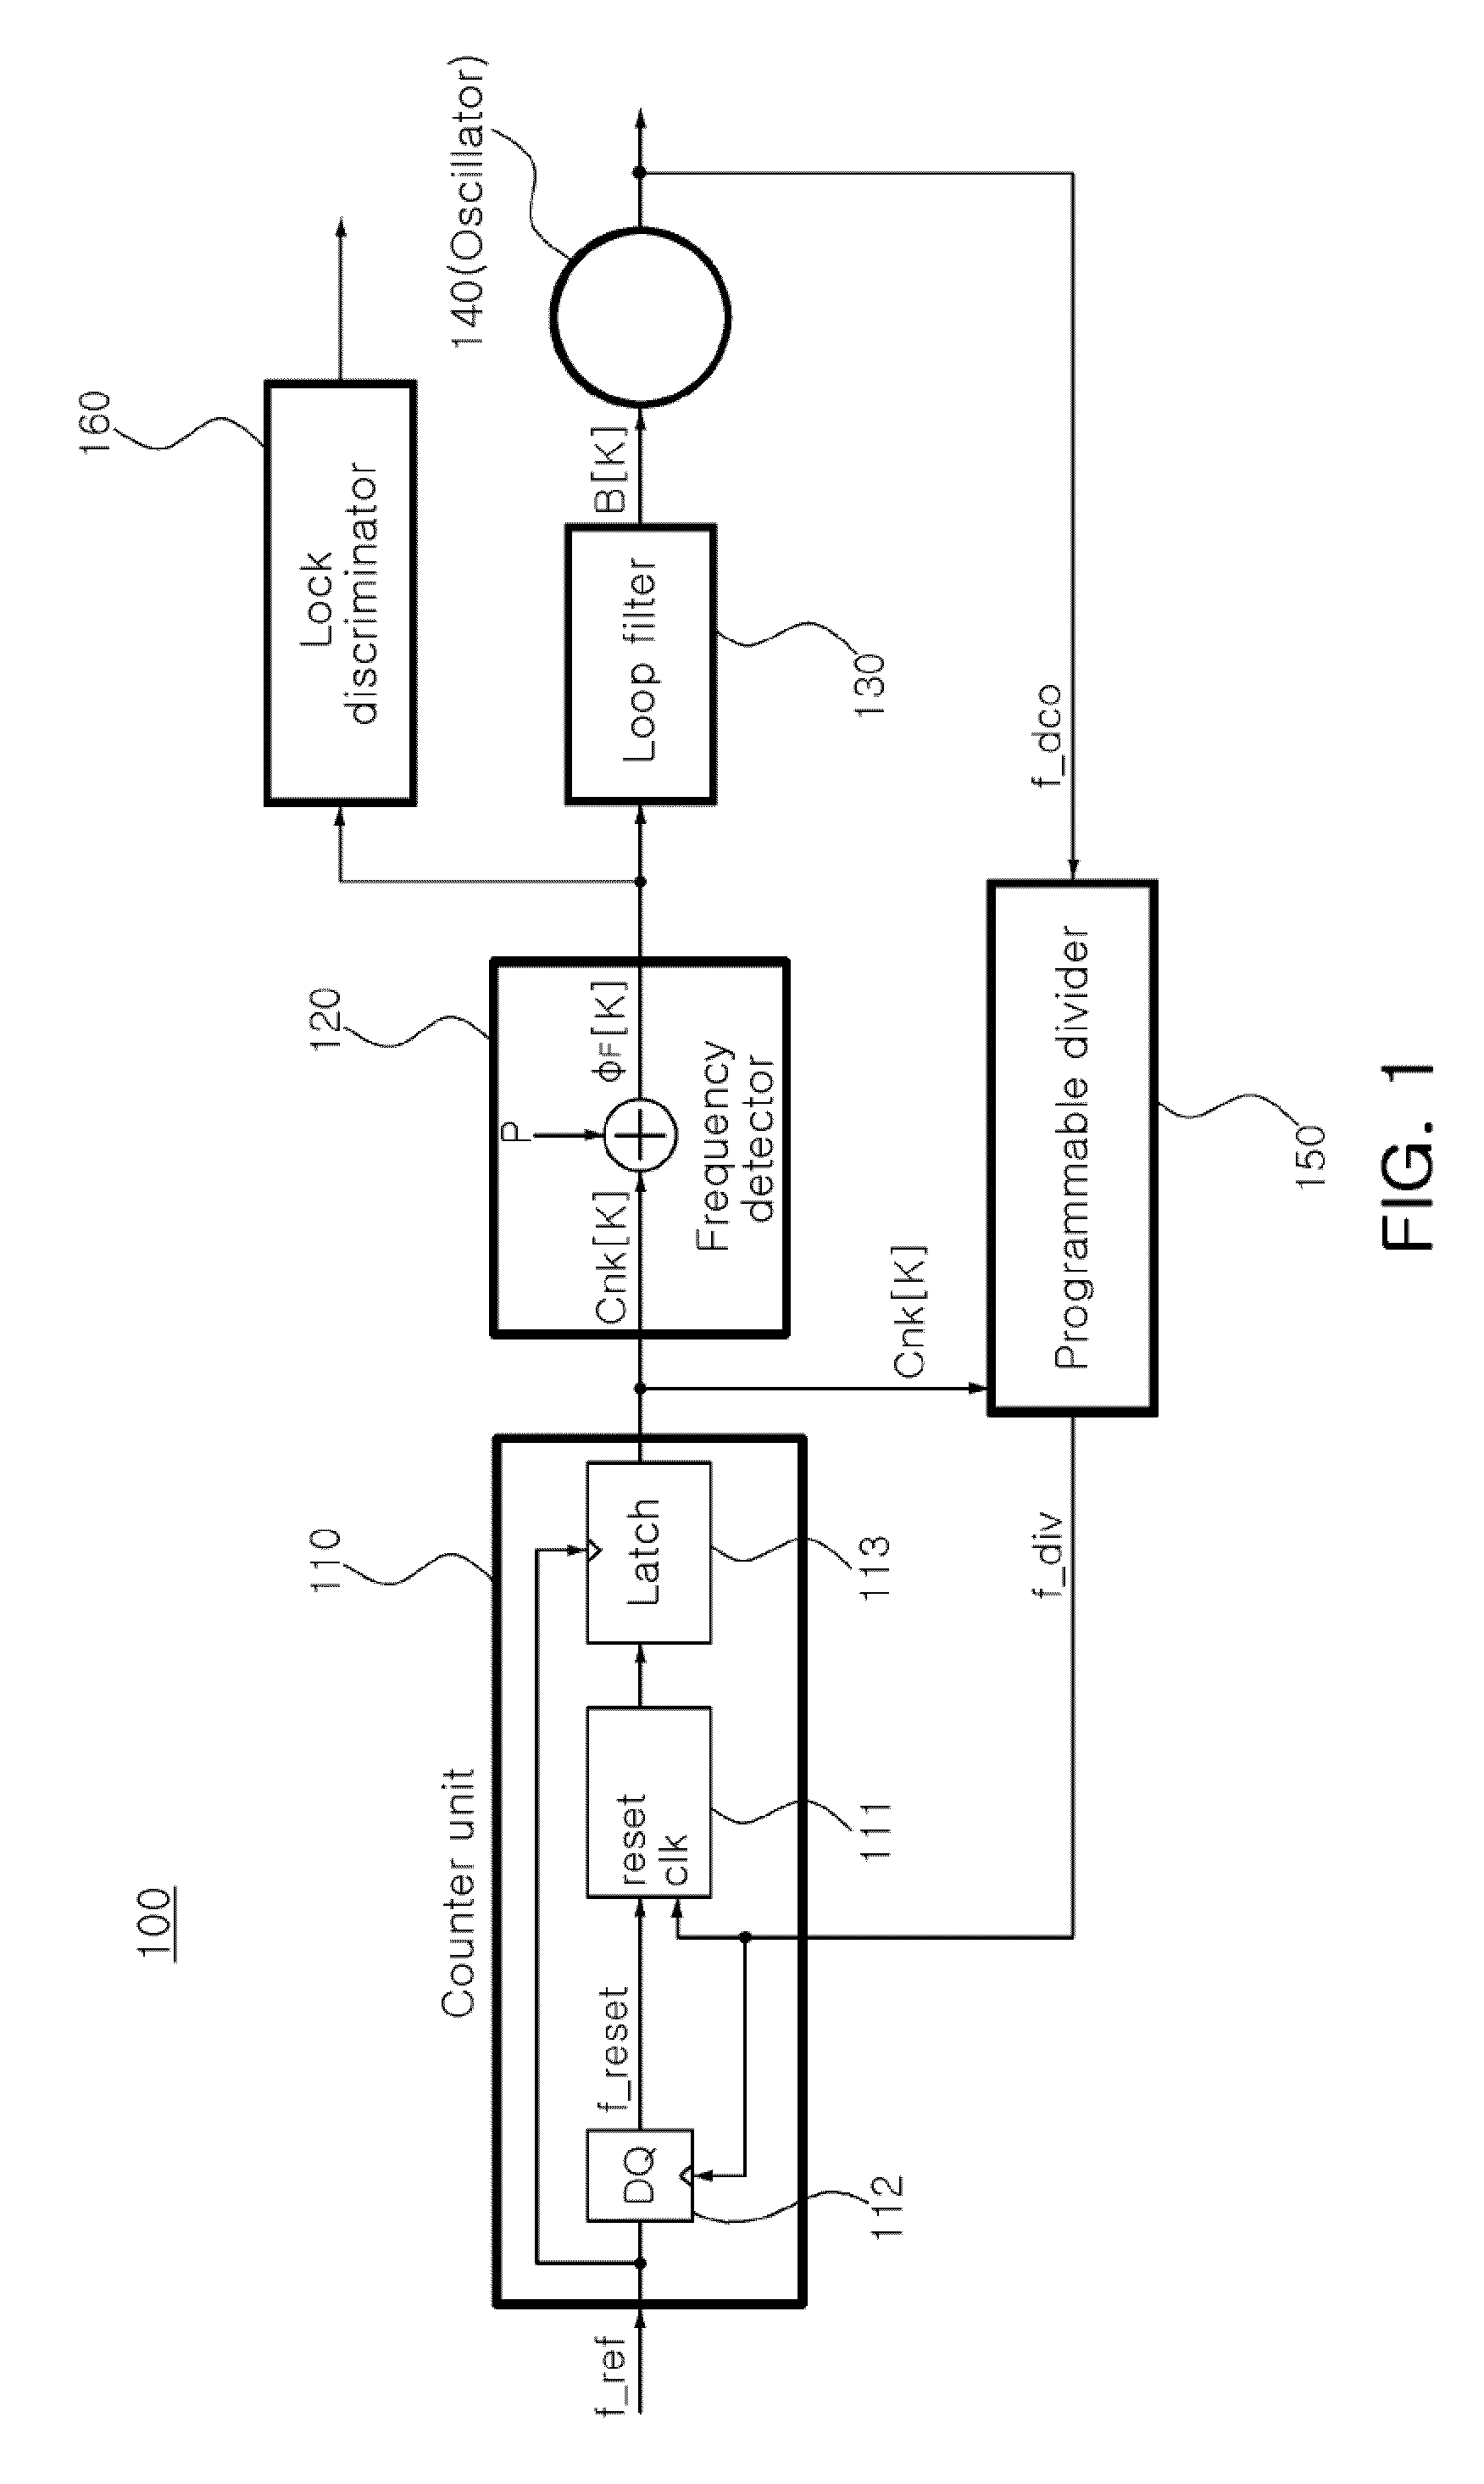 Frequency calibration loop circuit